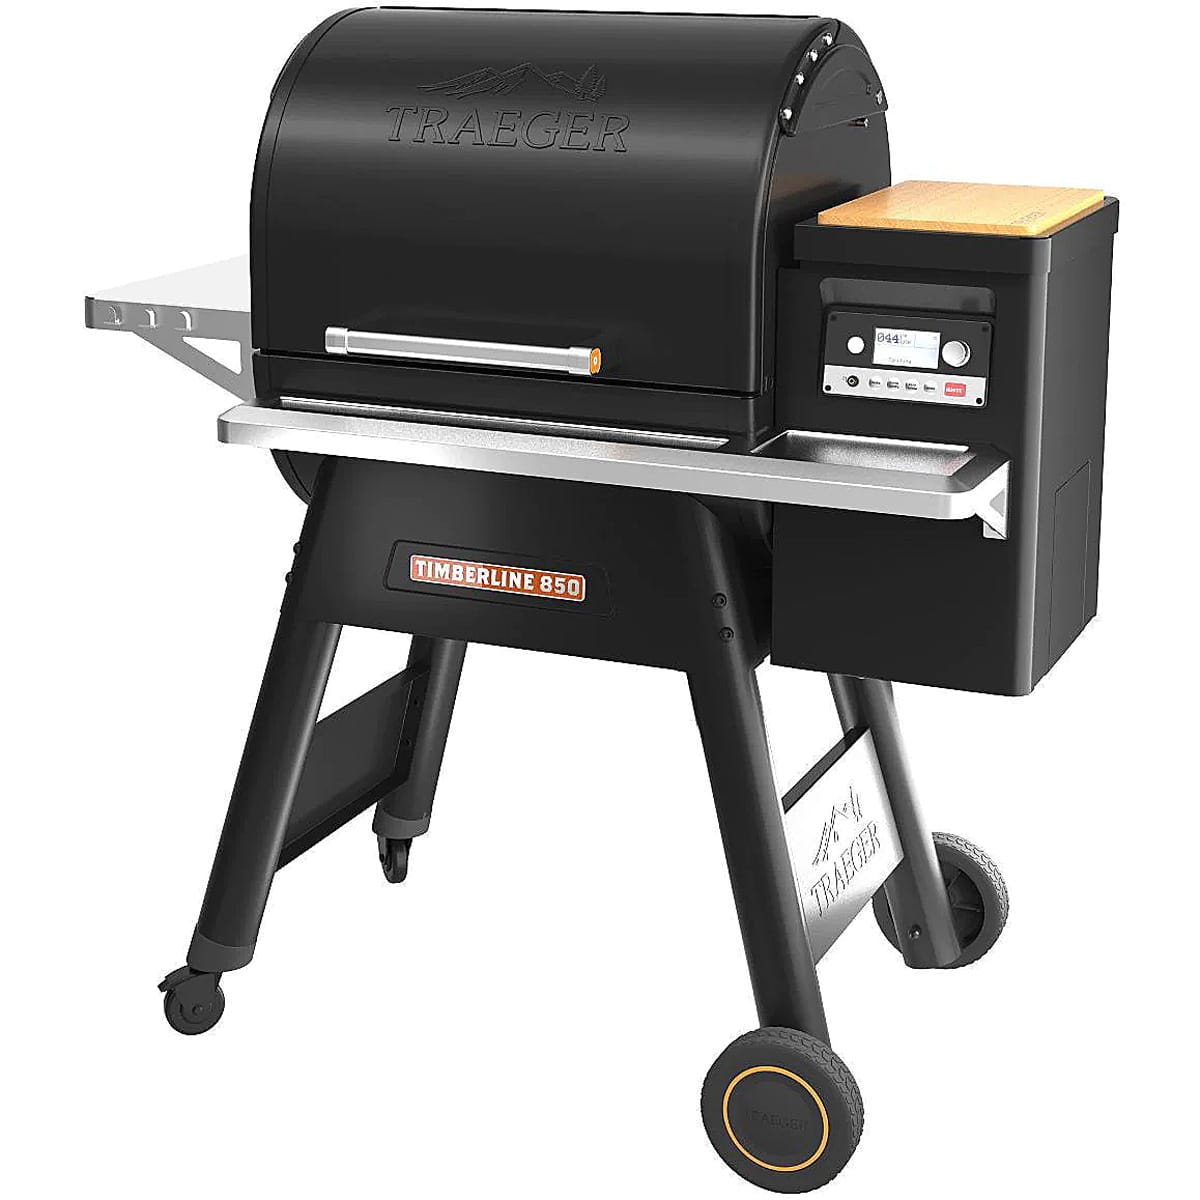 Smoking Hot Barbecue Accessories - Your AAA Network